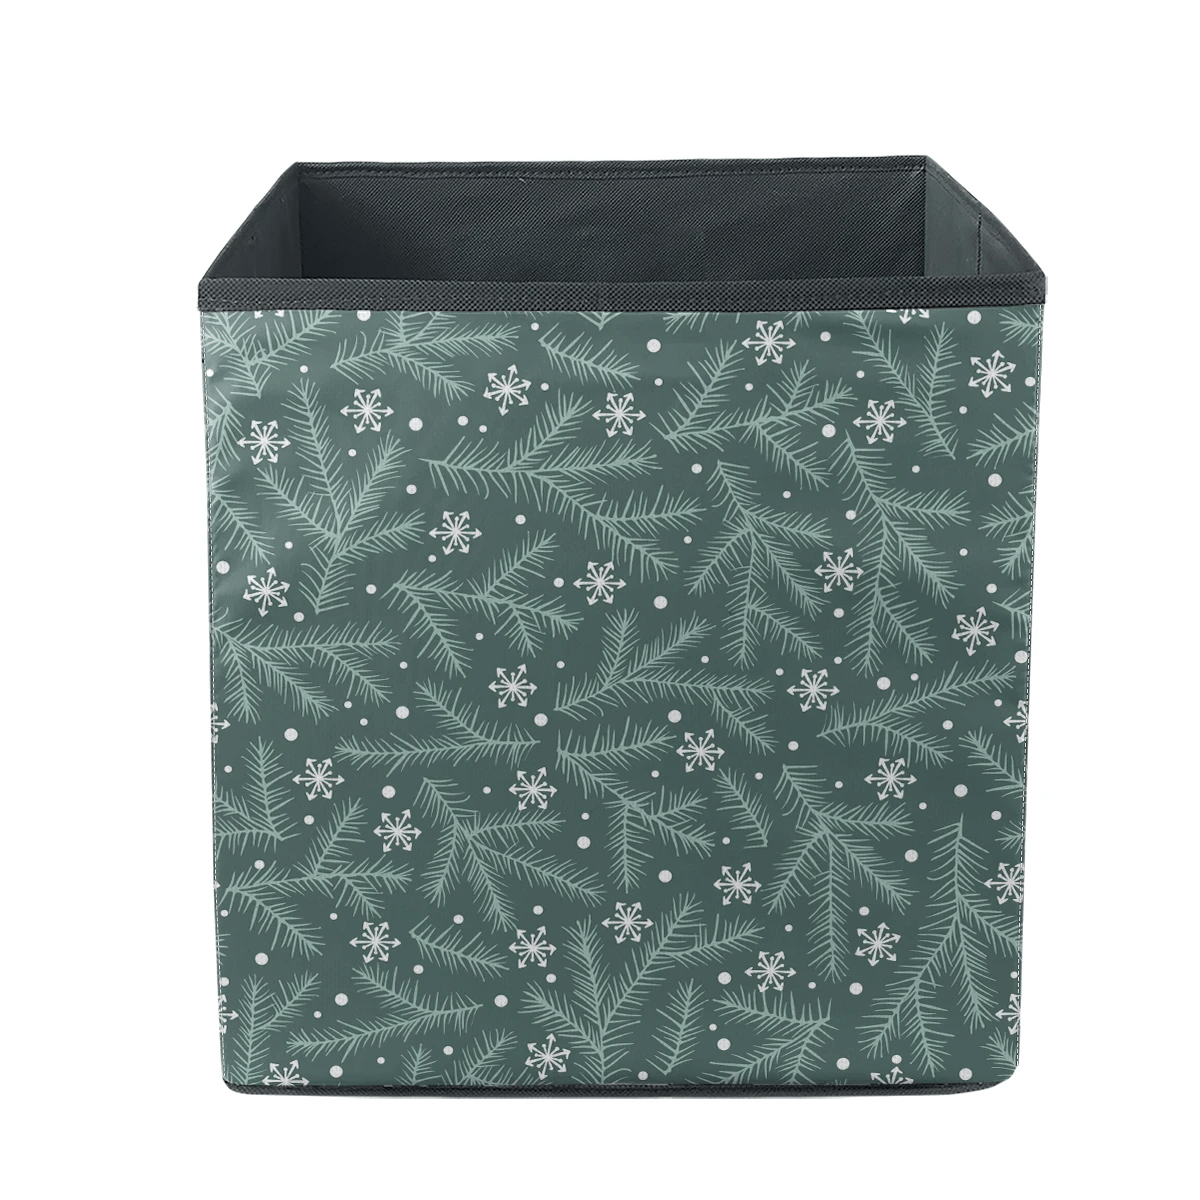 Rustic Christmas Forest With Snowflakes And Fir-Tree Branches Storage Bin Storage Cube